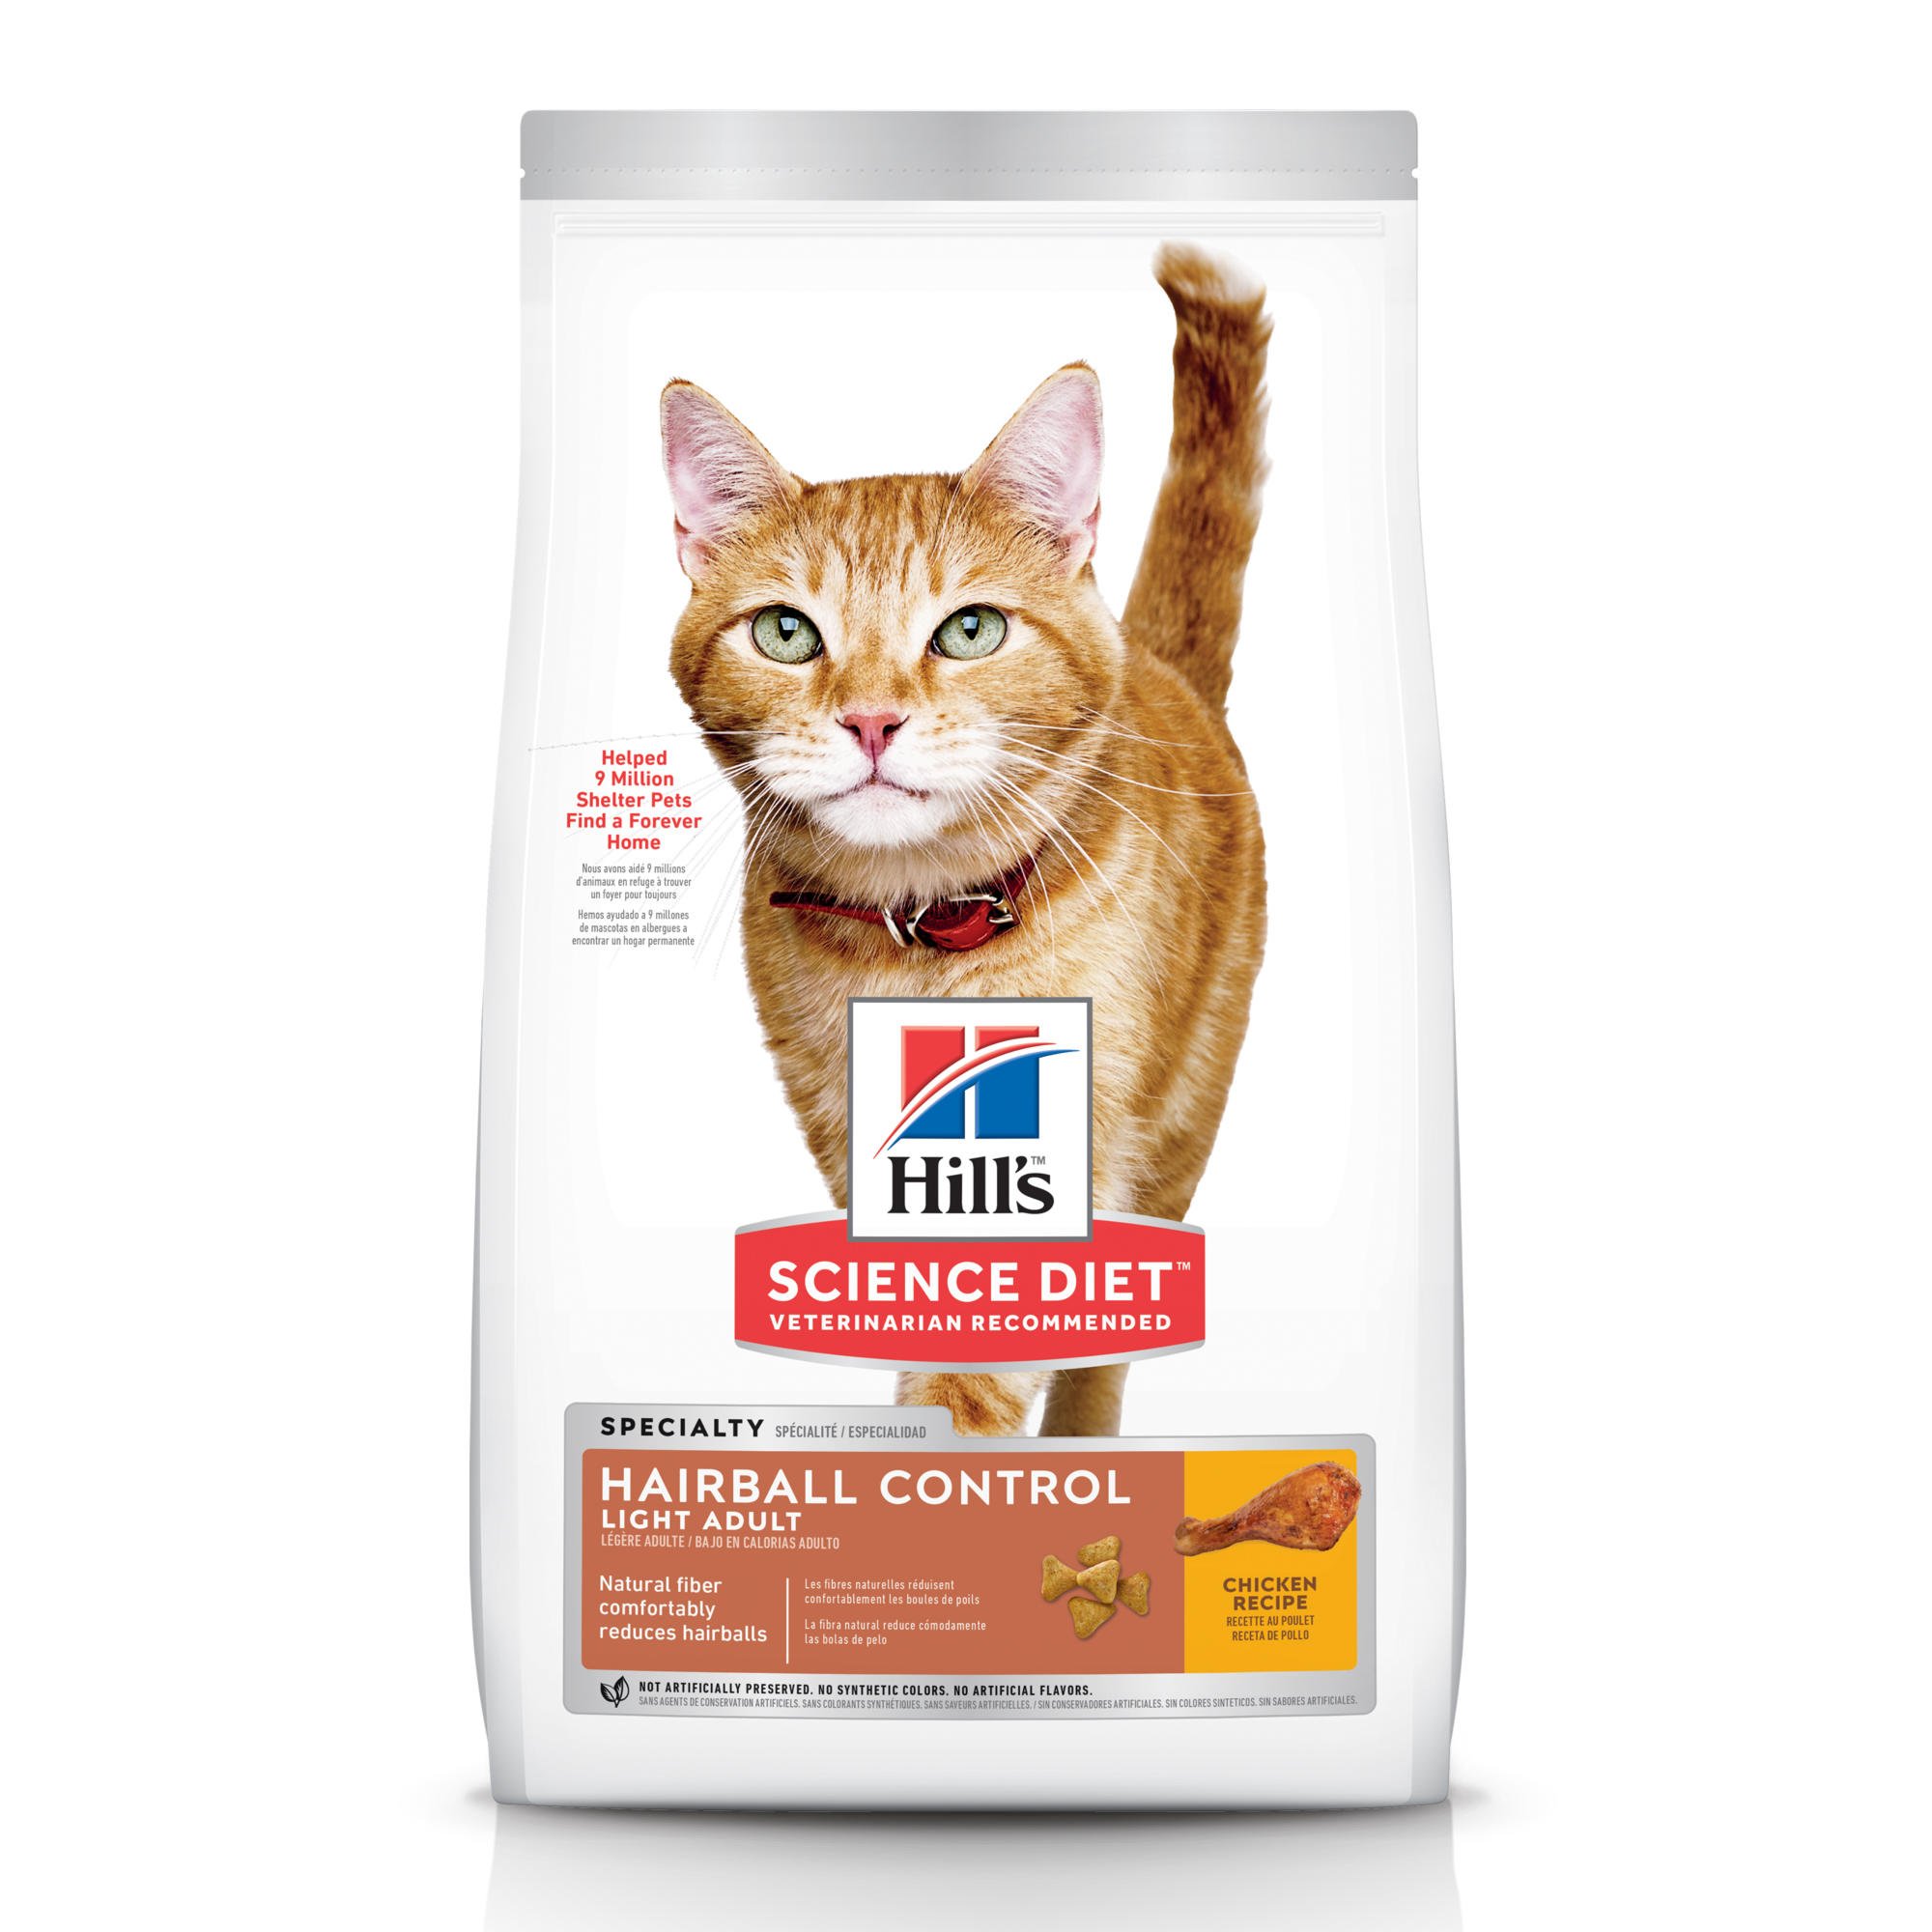 Hill's Science Diet Hairball Control Light Adult Cat Food, 7 lbs